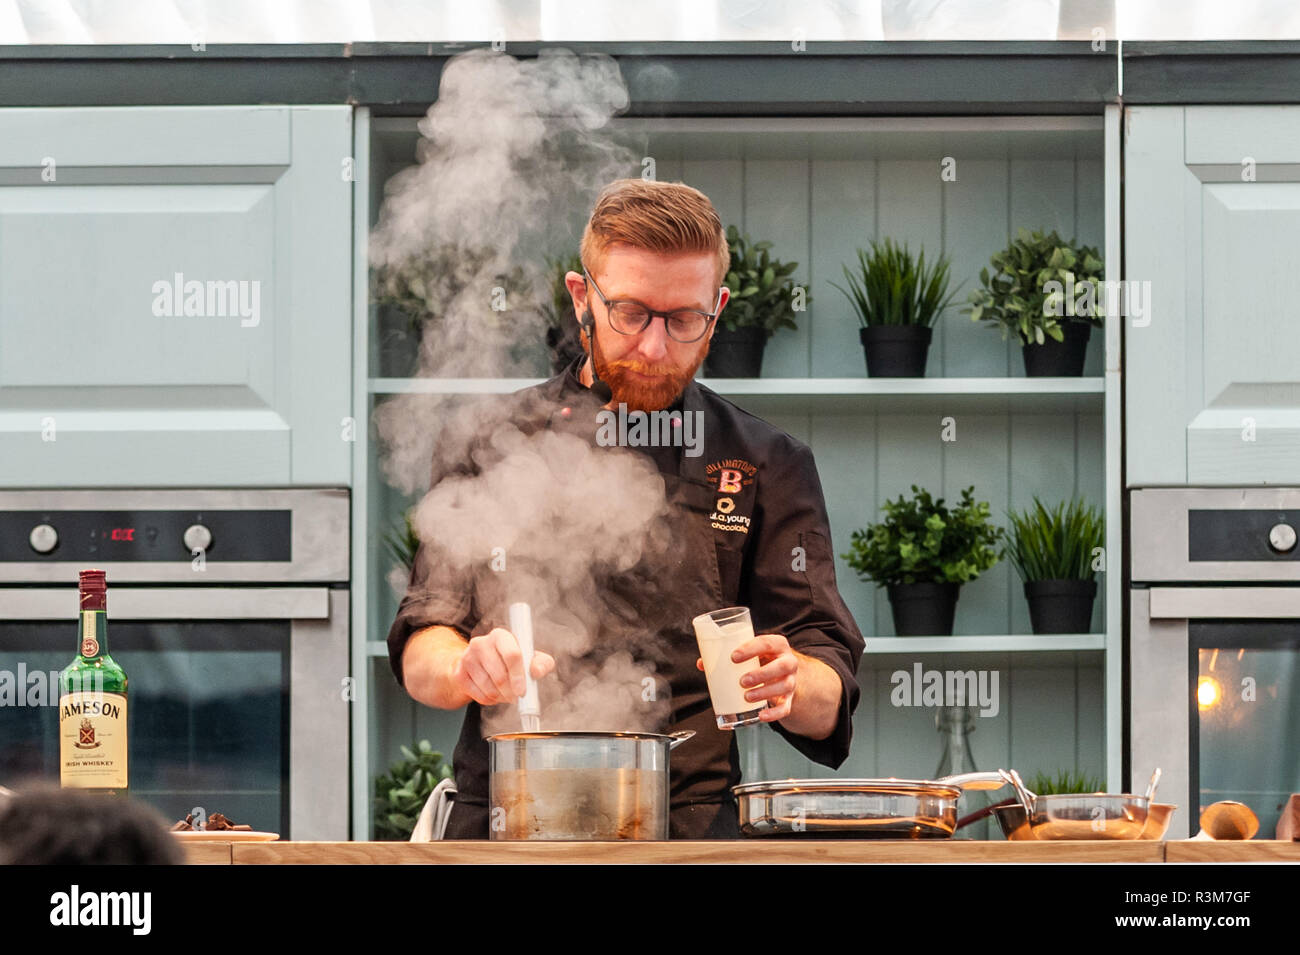 Cork, Ireland. 24th Nov, 2018. World famous chocolatier and TV Personality Paul A. Young gives a recipe making demonstration at the chocolate weekend. Credit: Andy Gibson/Alamy Live News. Stock Photo